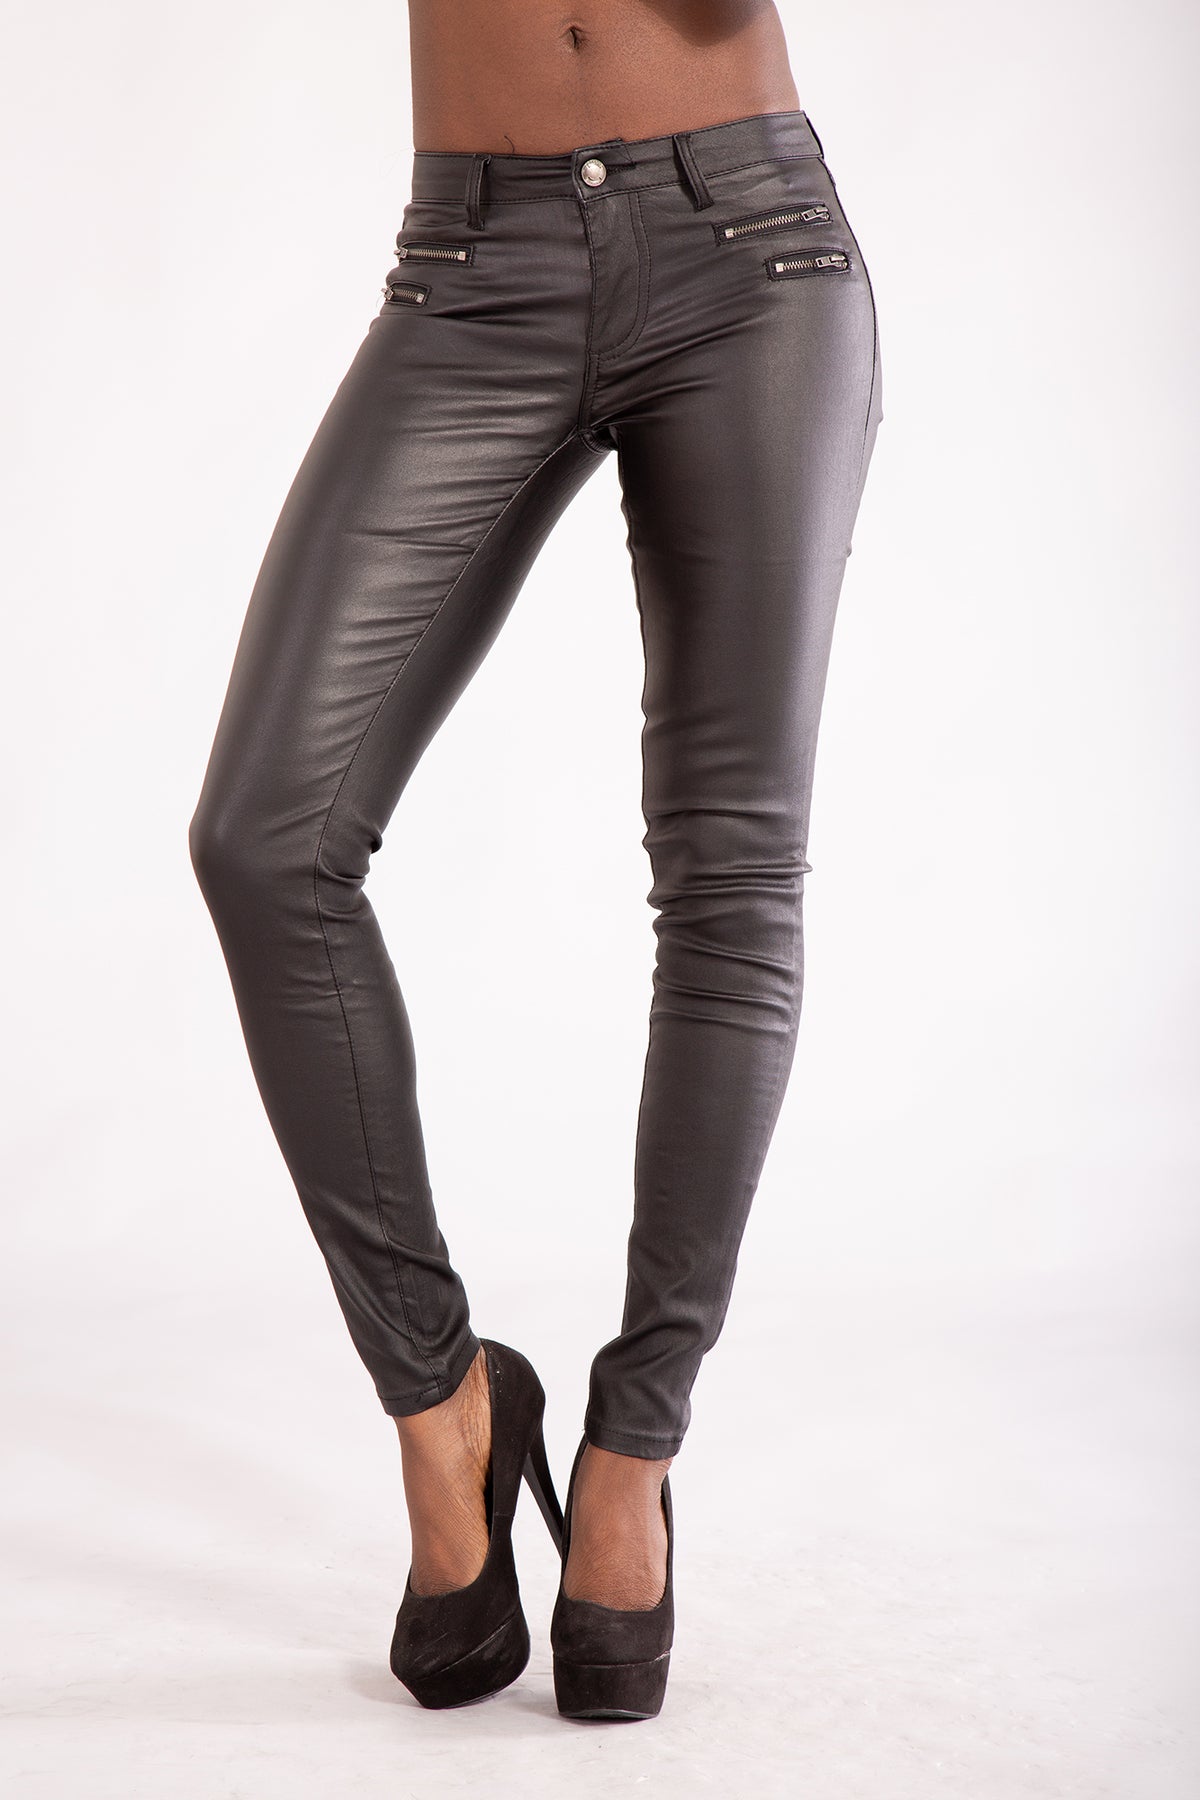 Glook Womens Black Leather Look Trousers High Waist Slim Fit Skinny Butt  Lifting Jeans 6 Black  Amazoncouk Fashion